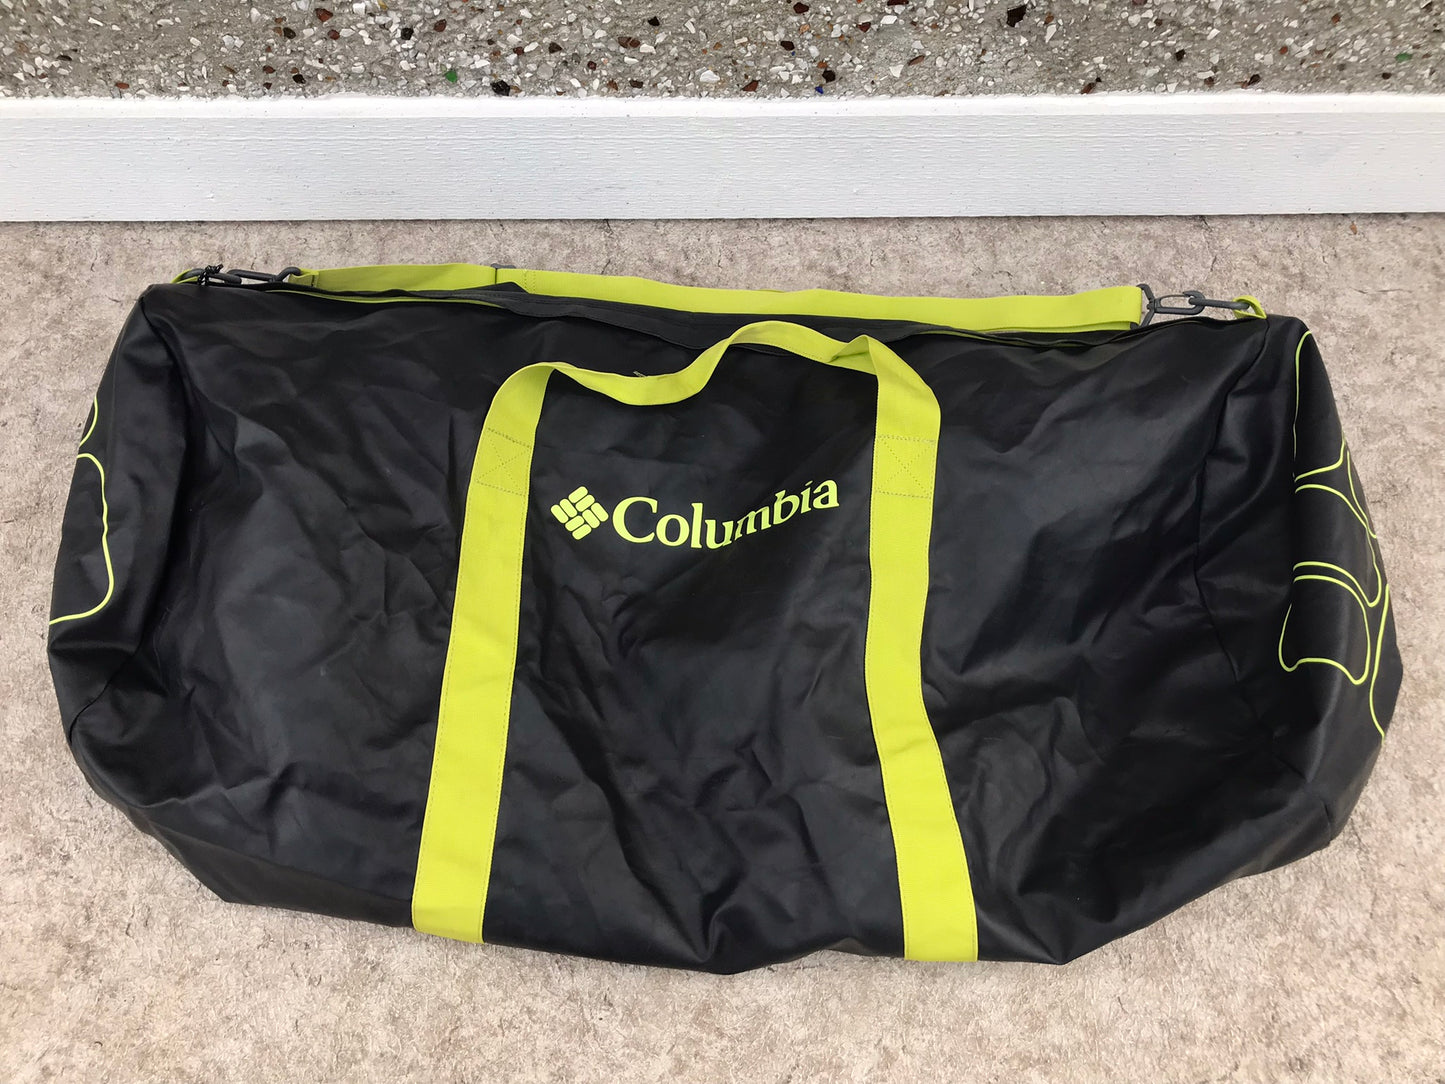 Columbia X Large Dry Sack Waterproof Duffle Camping Sports Gear Bag Excellent As New With Small Gear  Computer Bag All Zippers Perfect